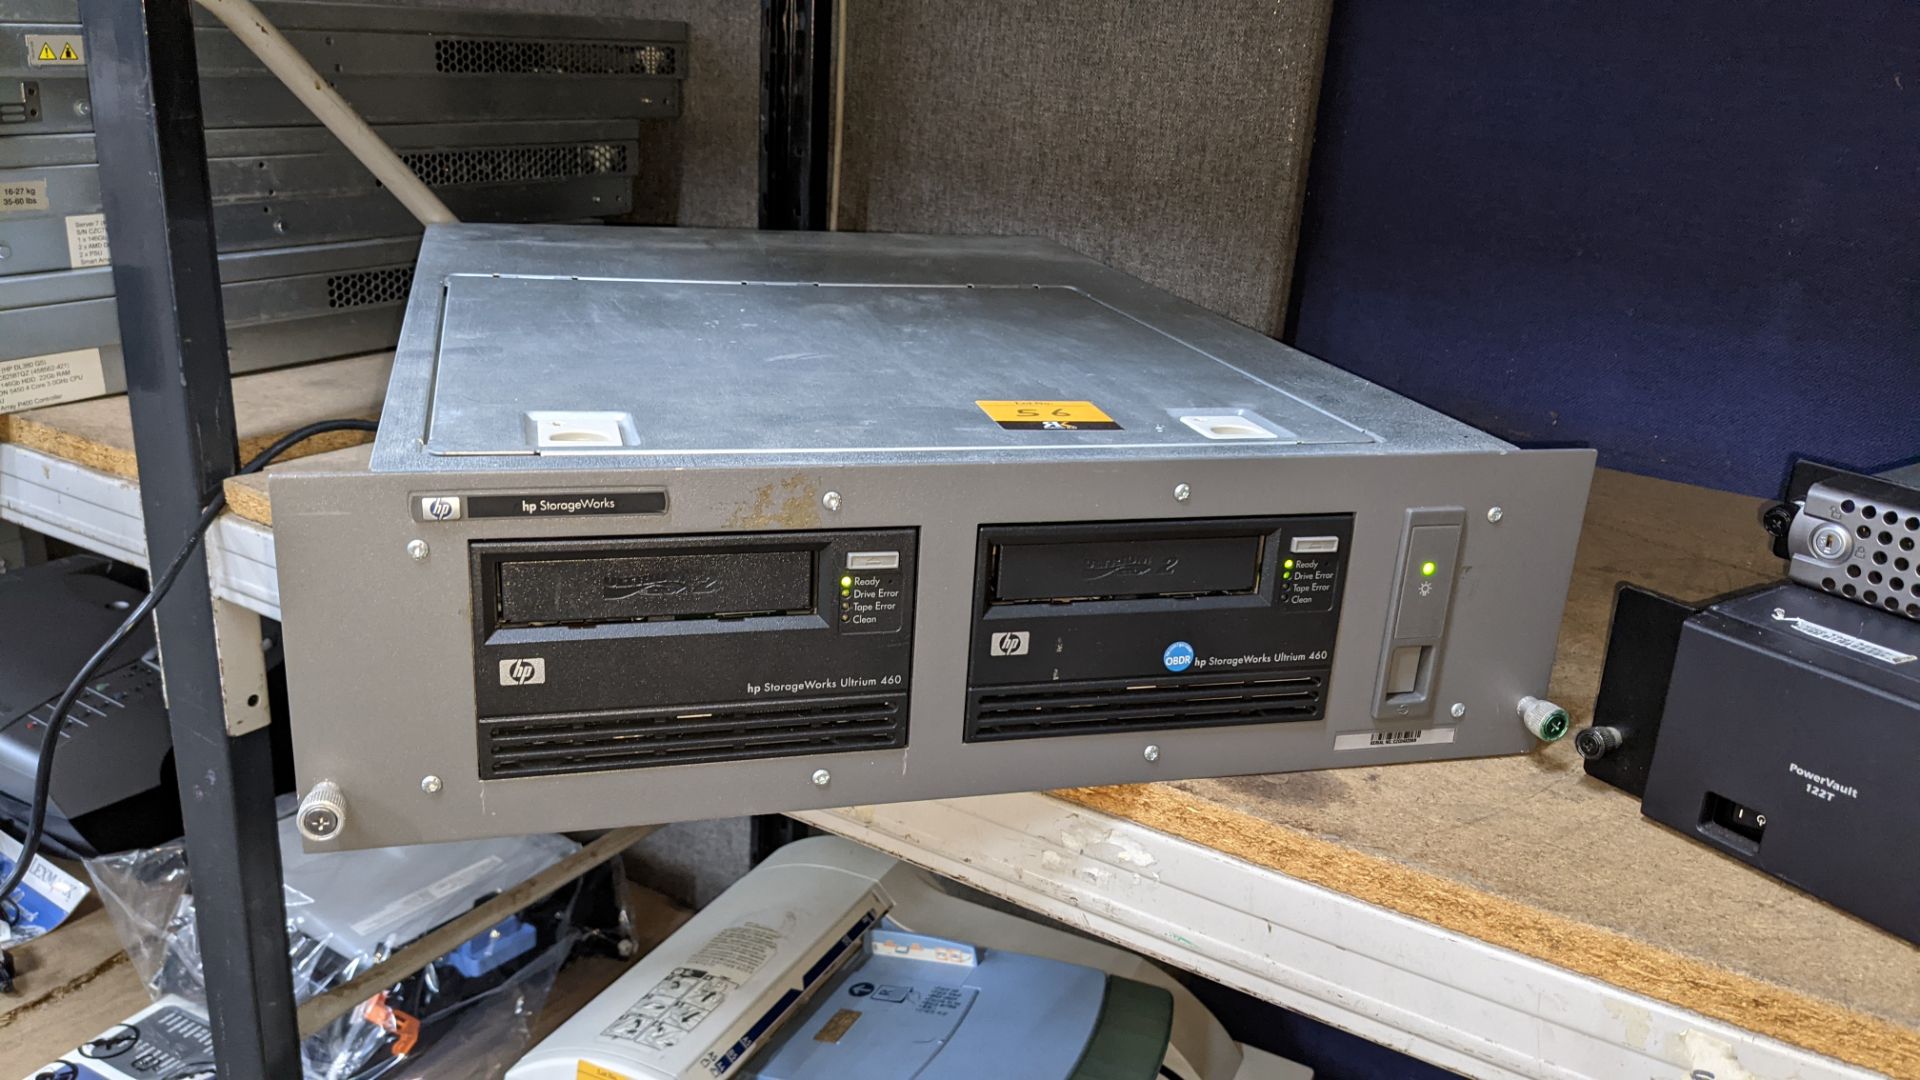 HP Storage Works Ultrium 460 twin tape drive system in rack mountable chassis - Image 2 of 6